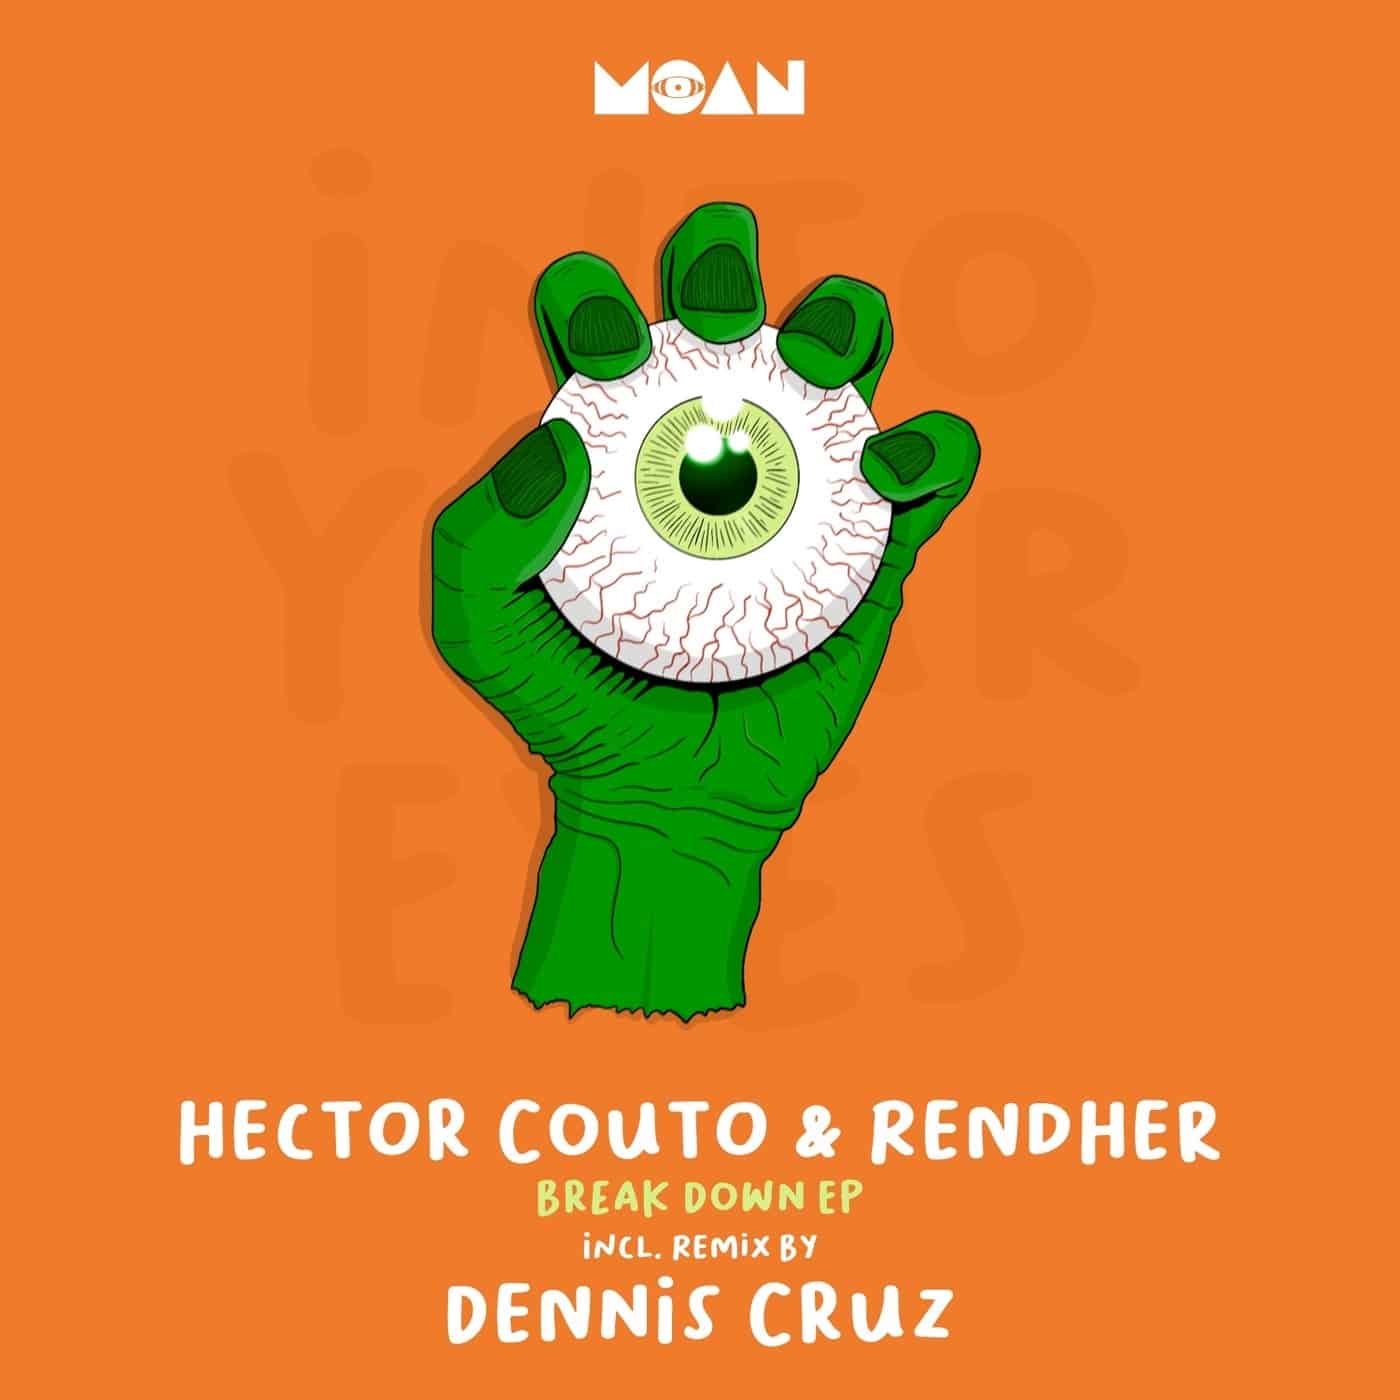 image cover: Hector Couto, Rendher - Break Down EP on Moan